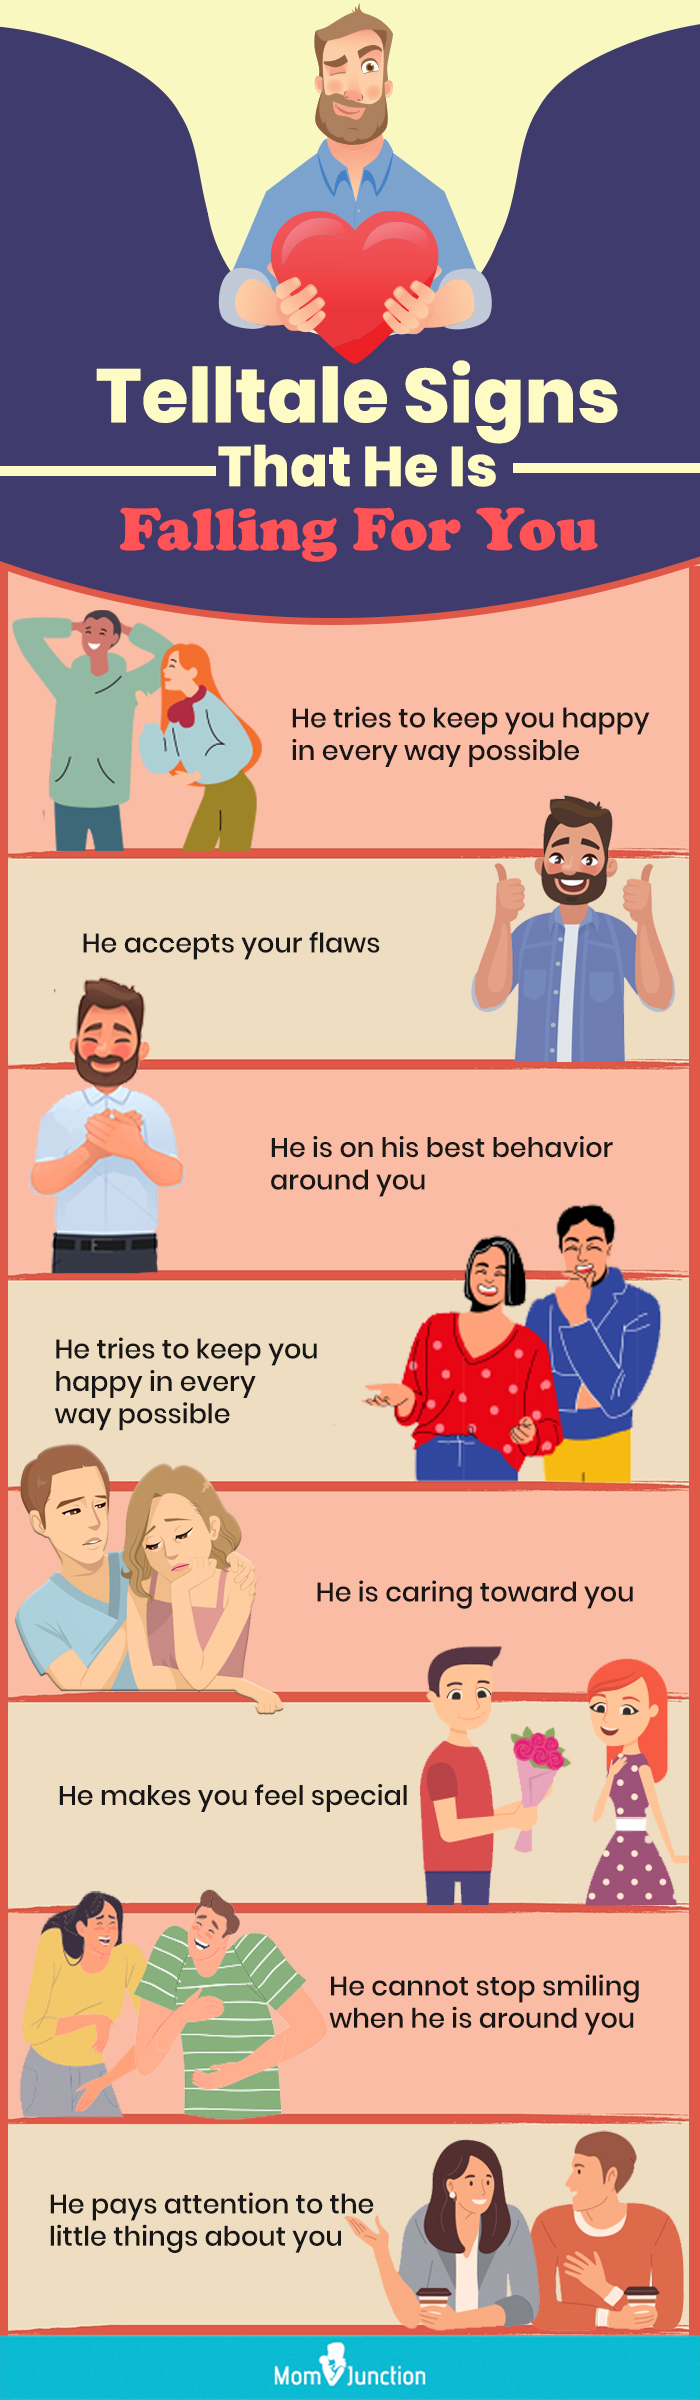 signs that he is falling in love with you (infographic)